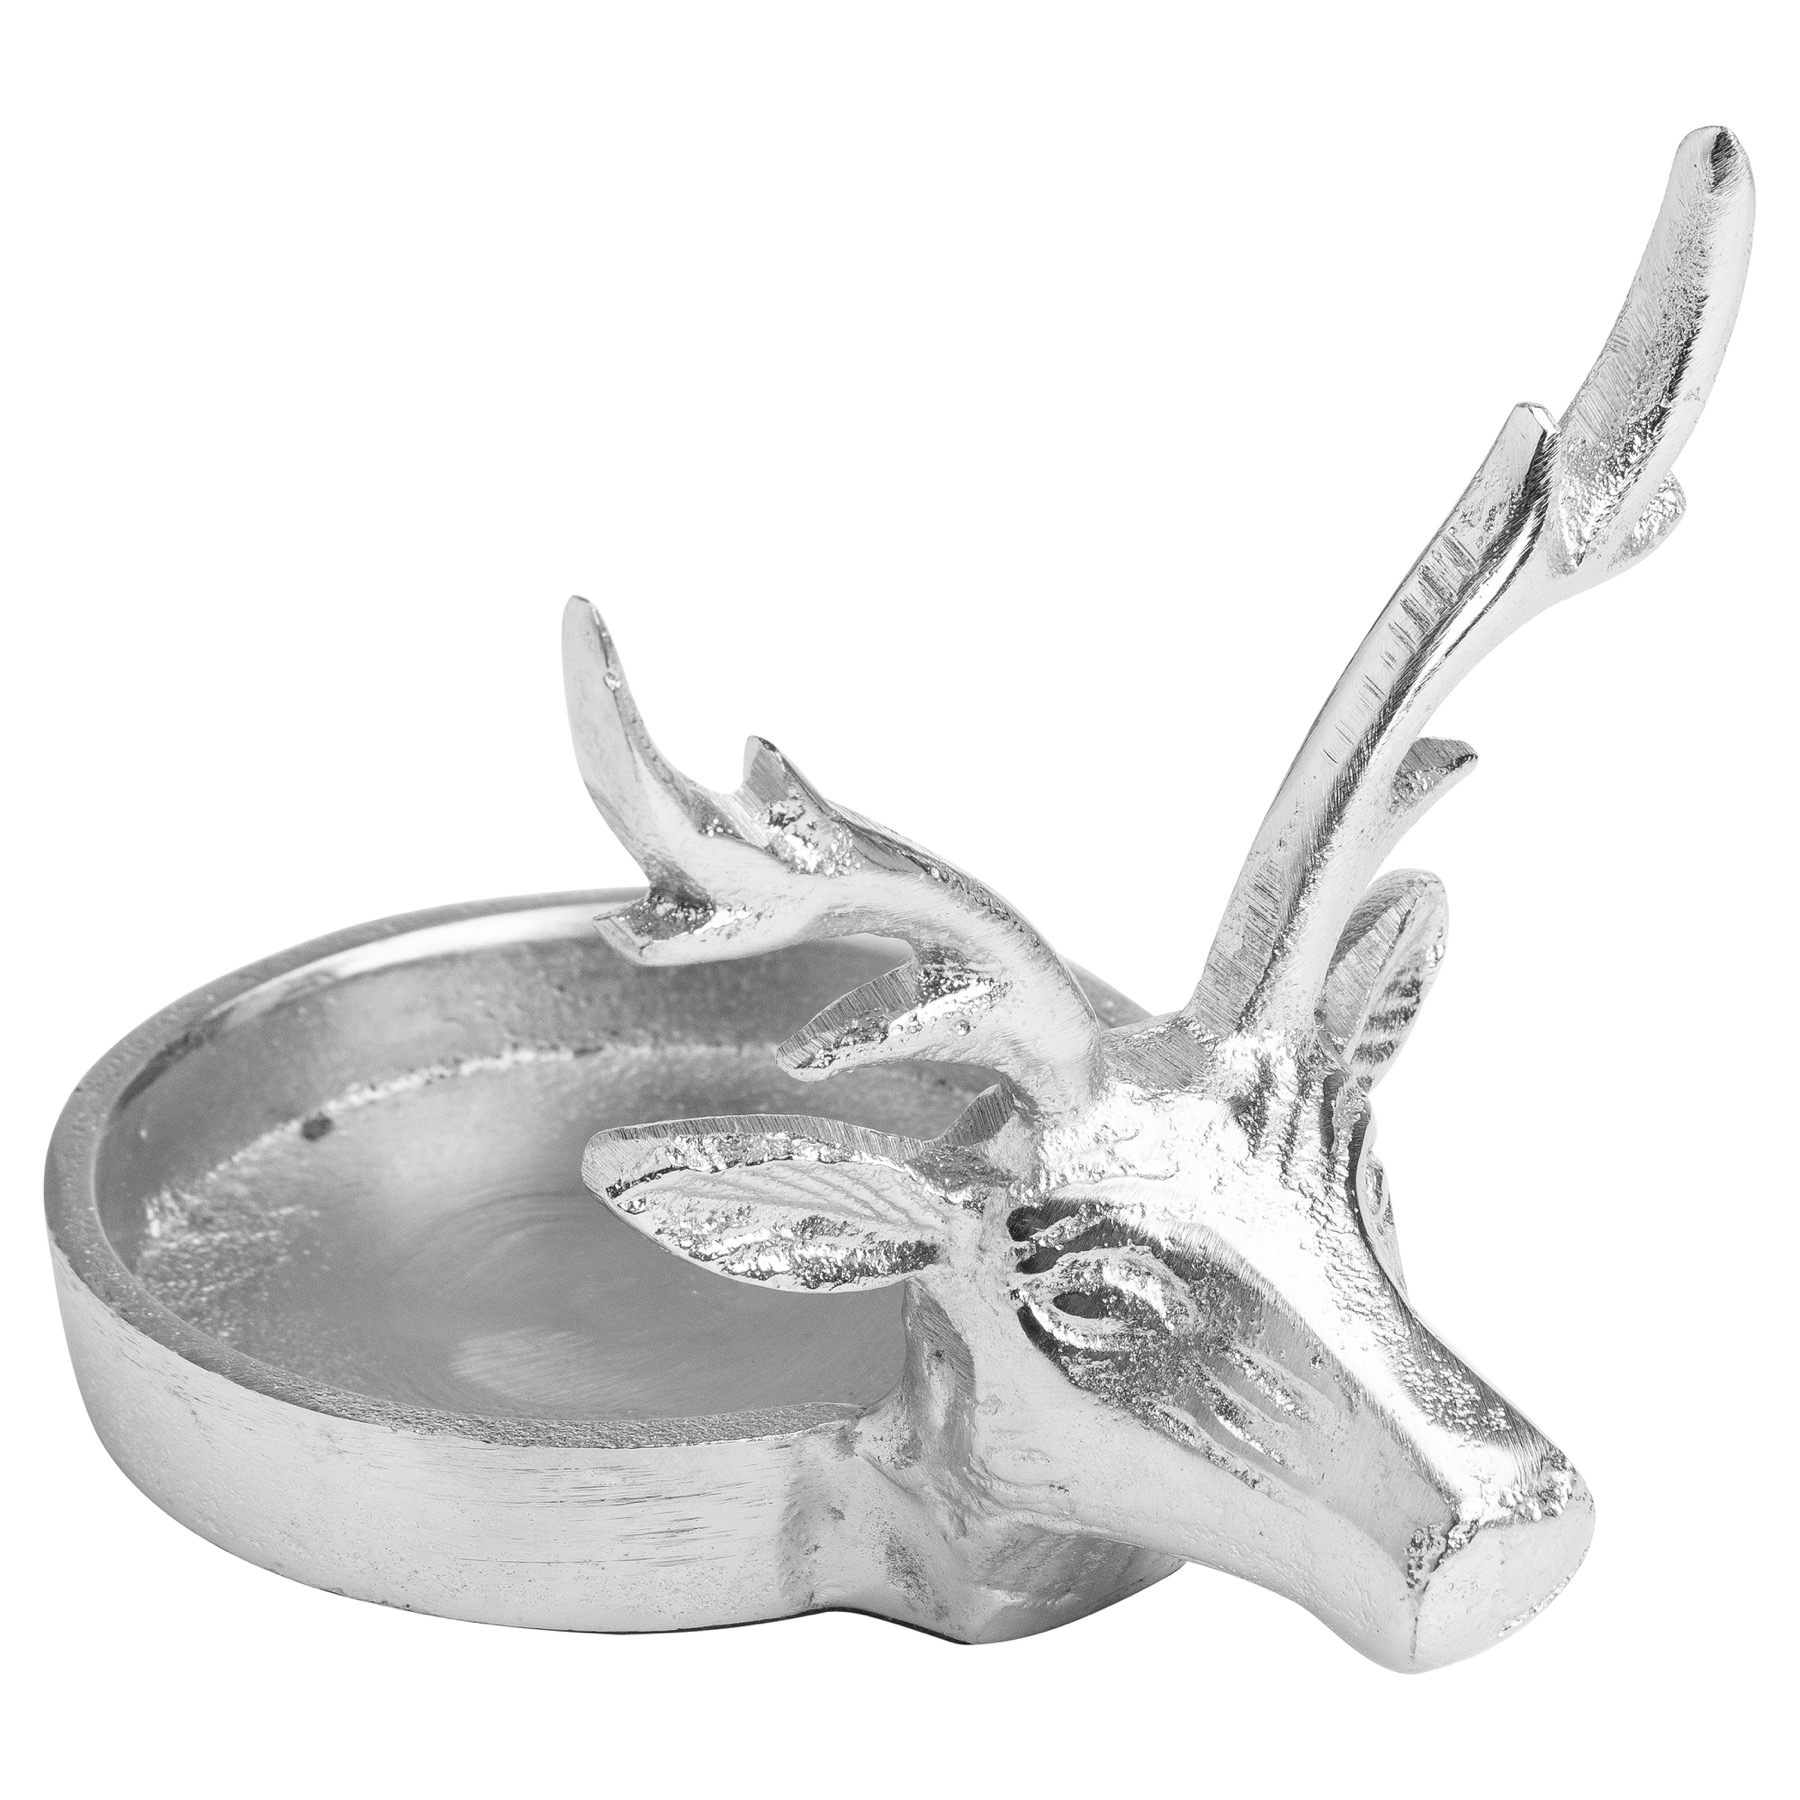 Farrah Collection Silver Stag Candle Holder - Image 1